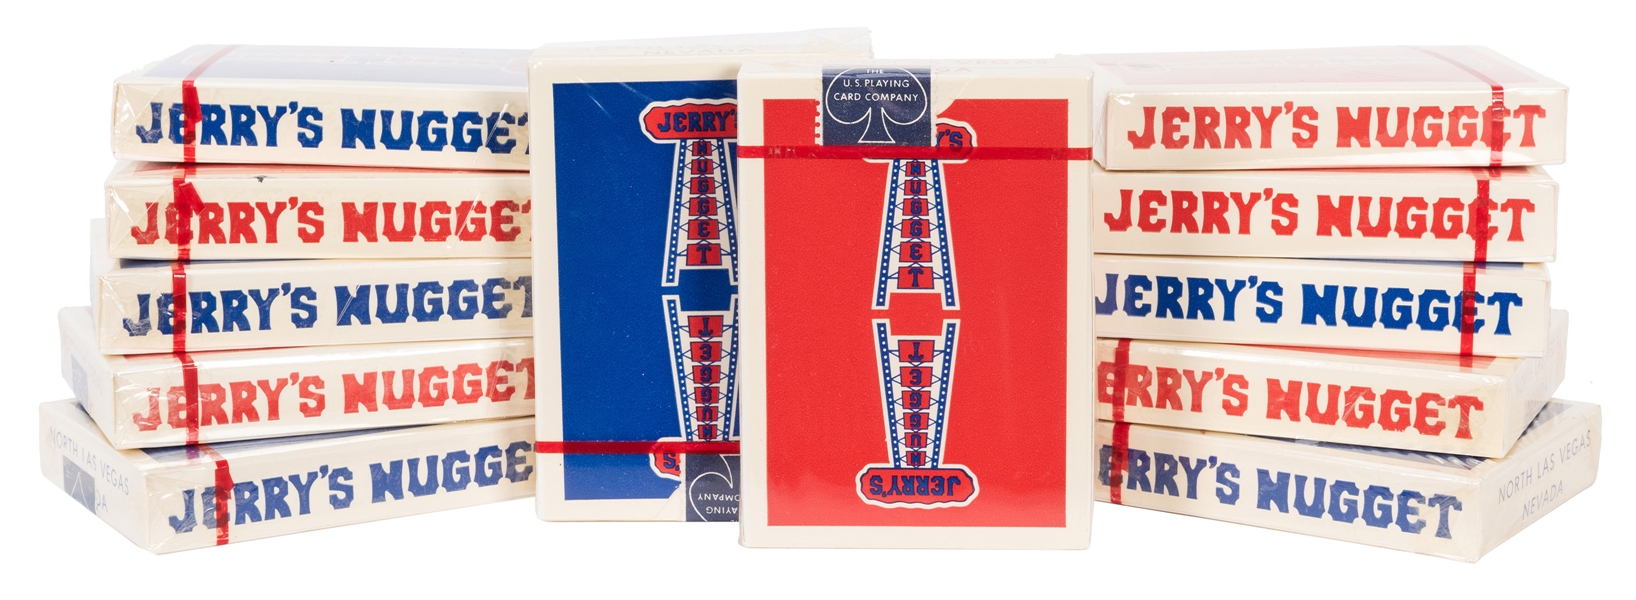 Brick (12 Packs) of Jerry’s Nugget Playing Cards.